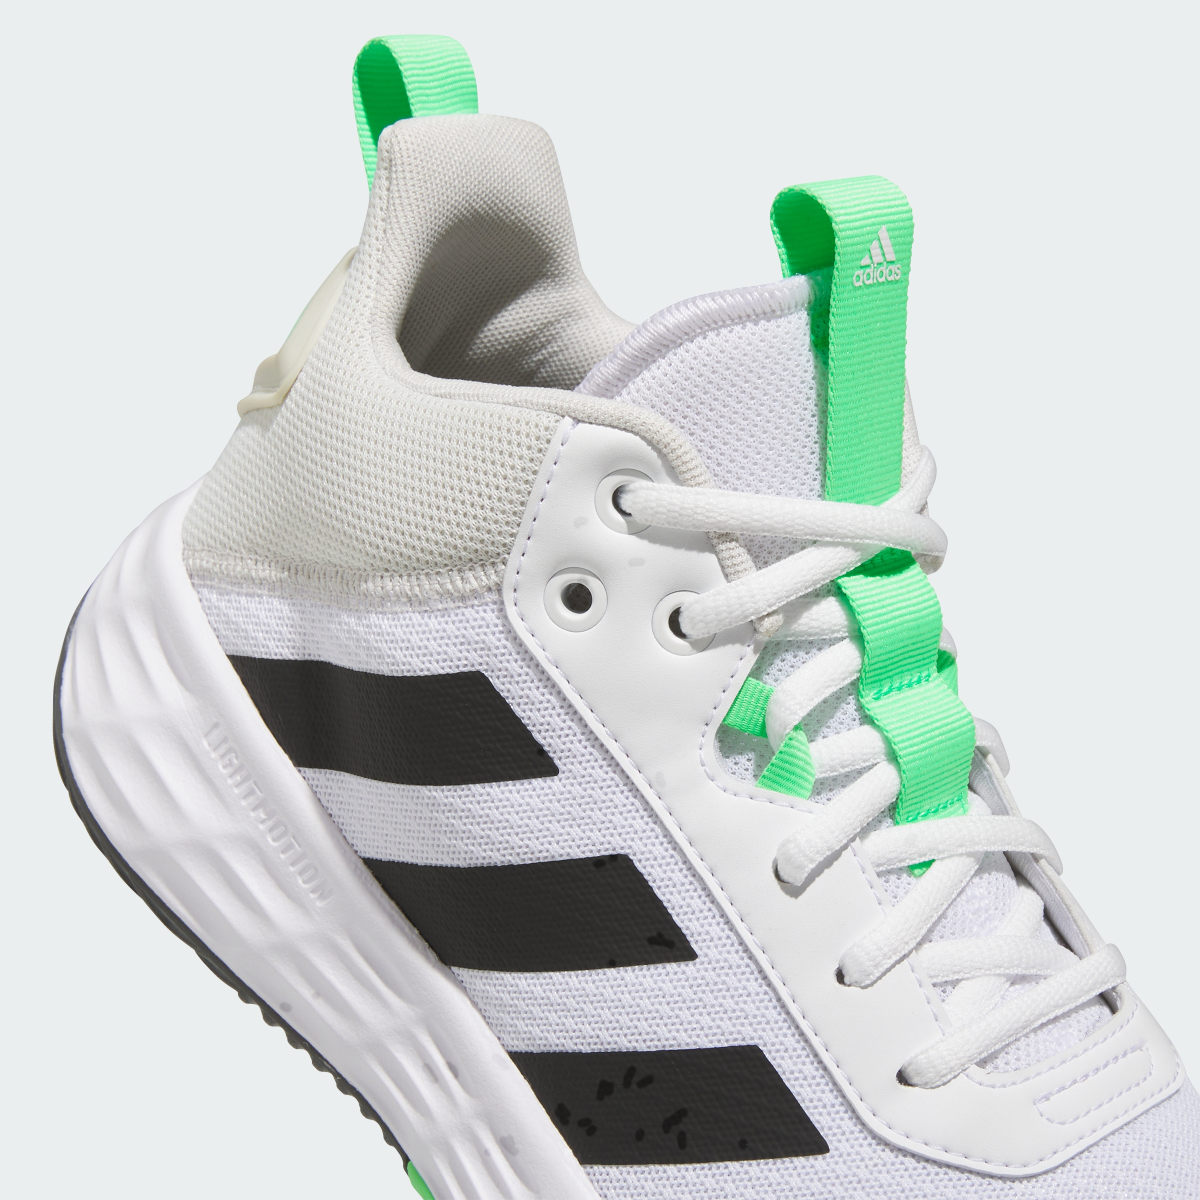 Adidas Ownthegame Shoes. 8